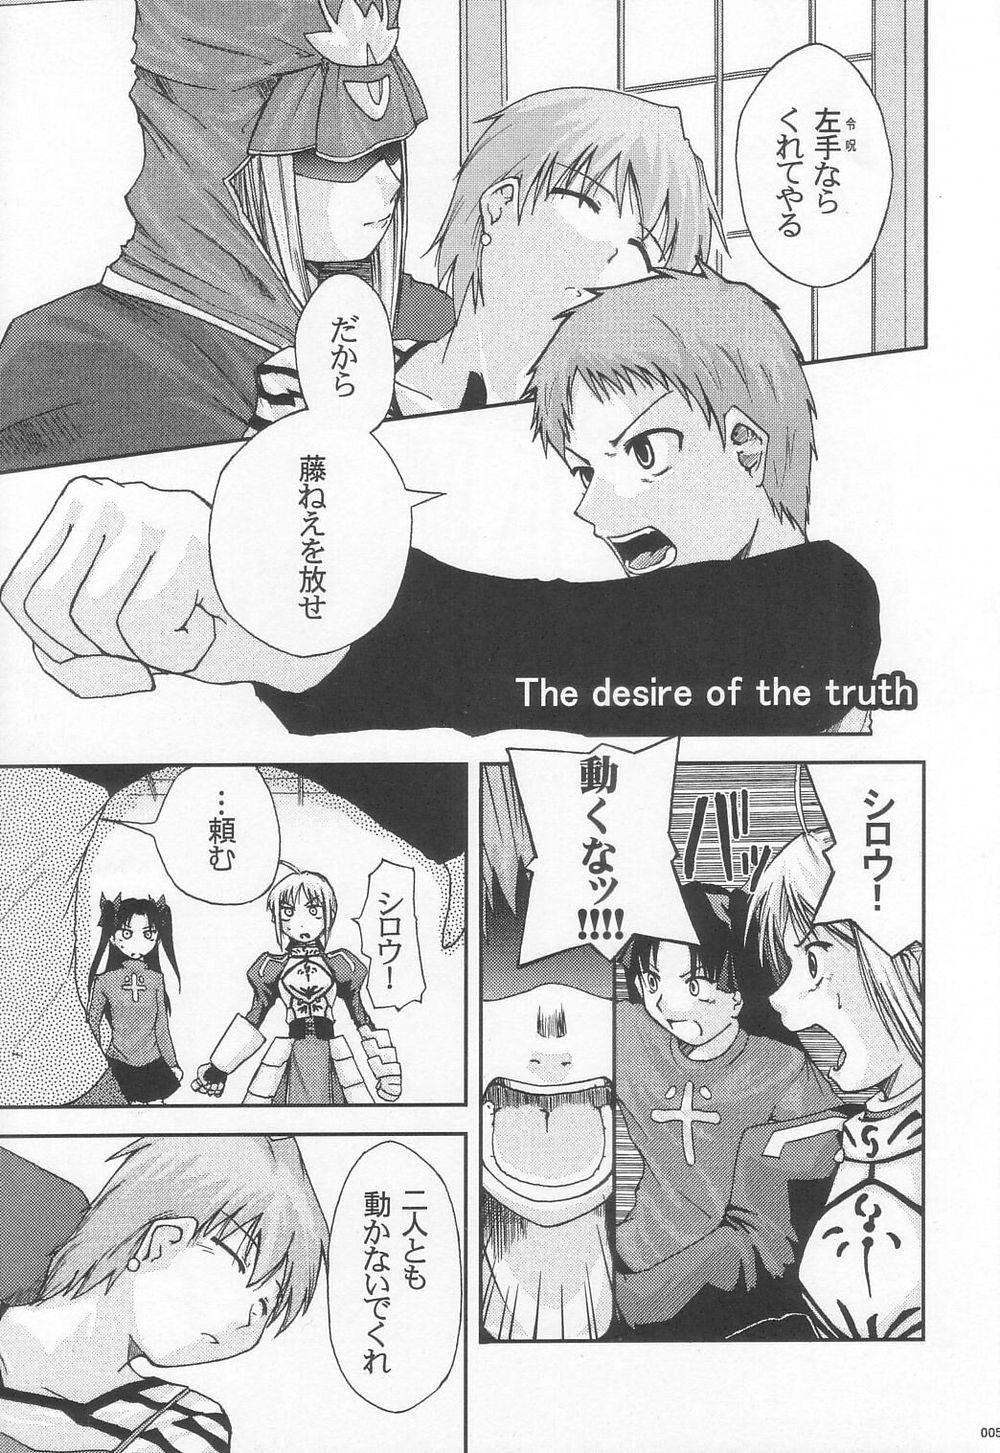 Jerking Off The desire of the truth - Fate stay night Throatfuck - Page 4